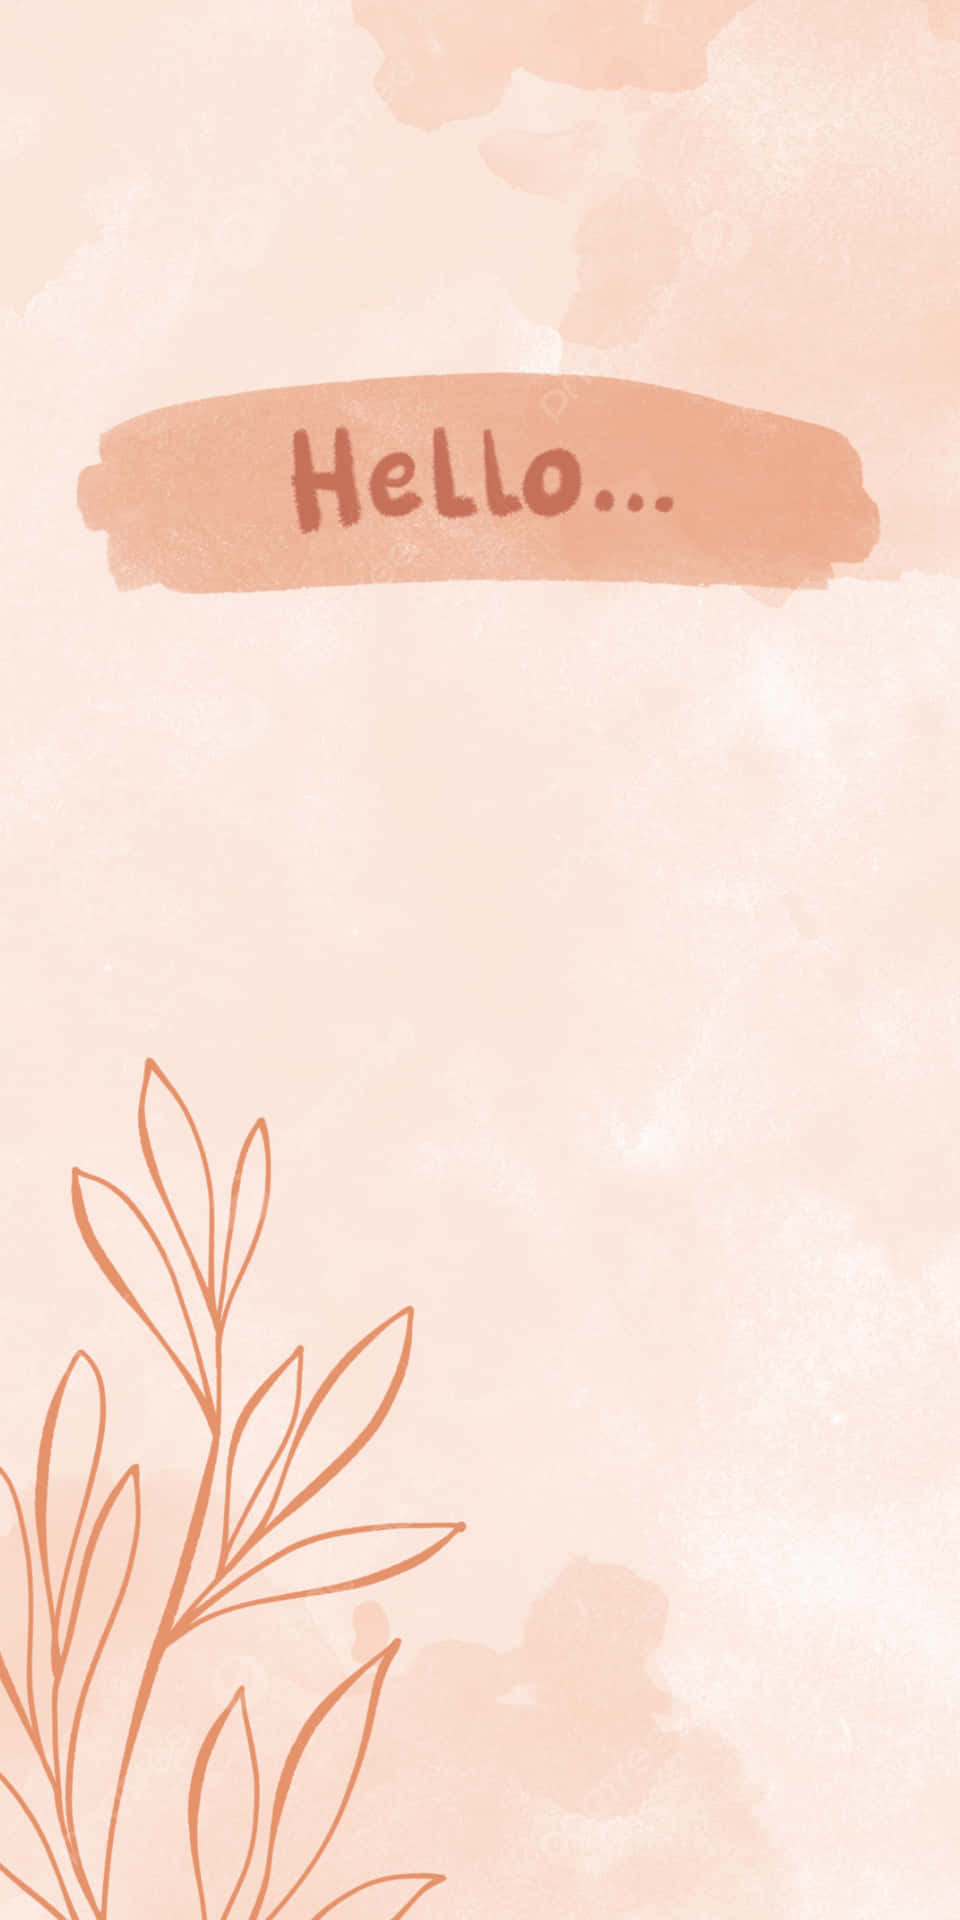 Beige Aesthetic Background With Hello